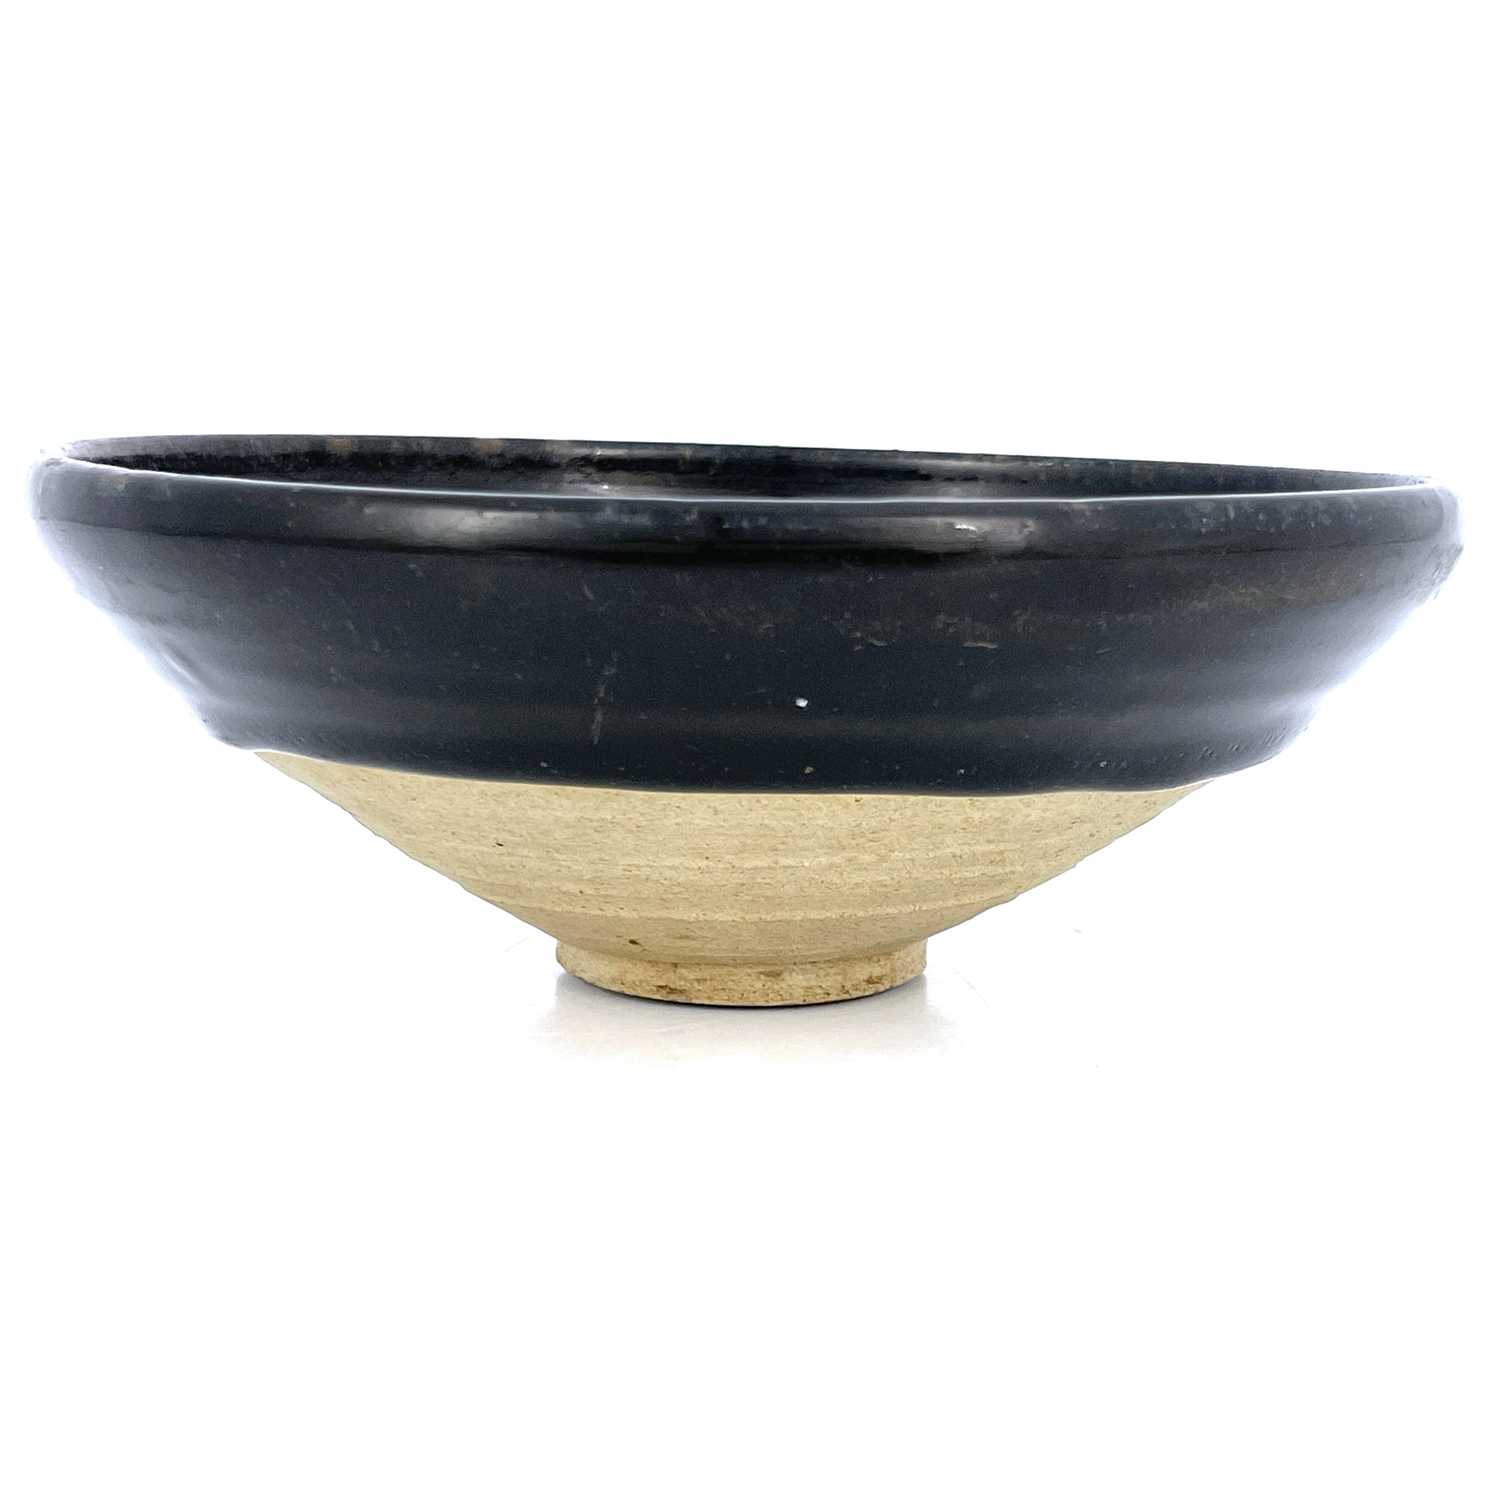 A Chinese Jian type black glazed bowl, probably Southern Song dynasty, conical with dipped glaze,